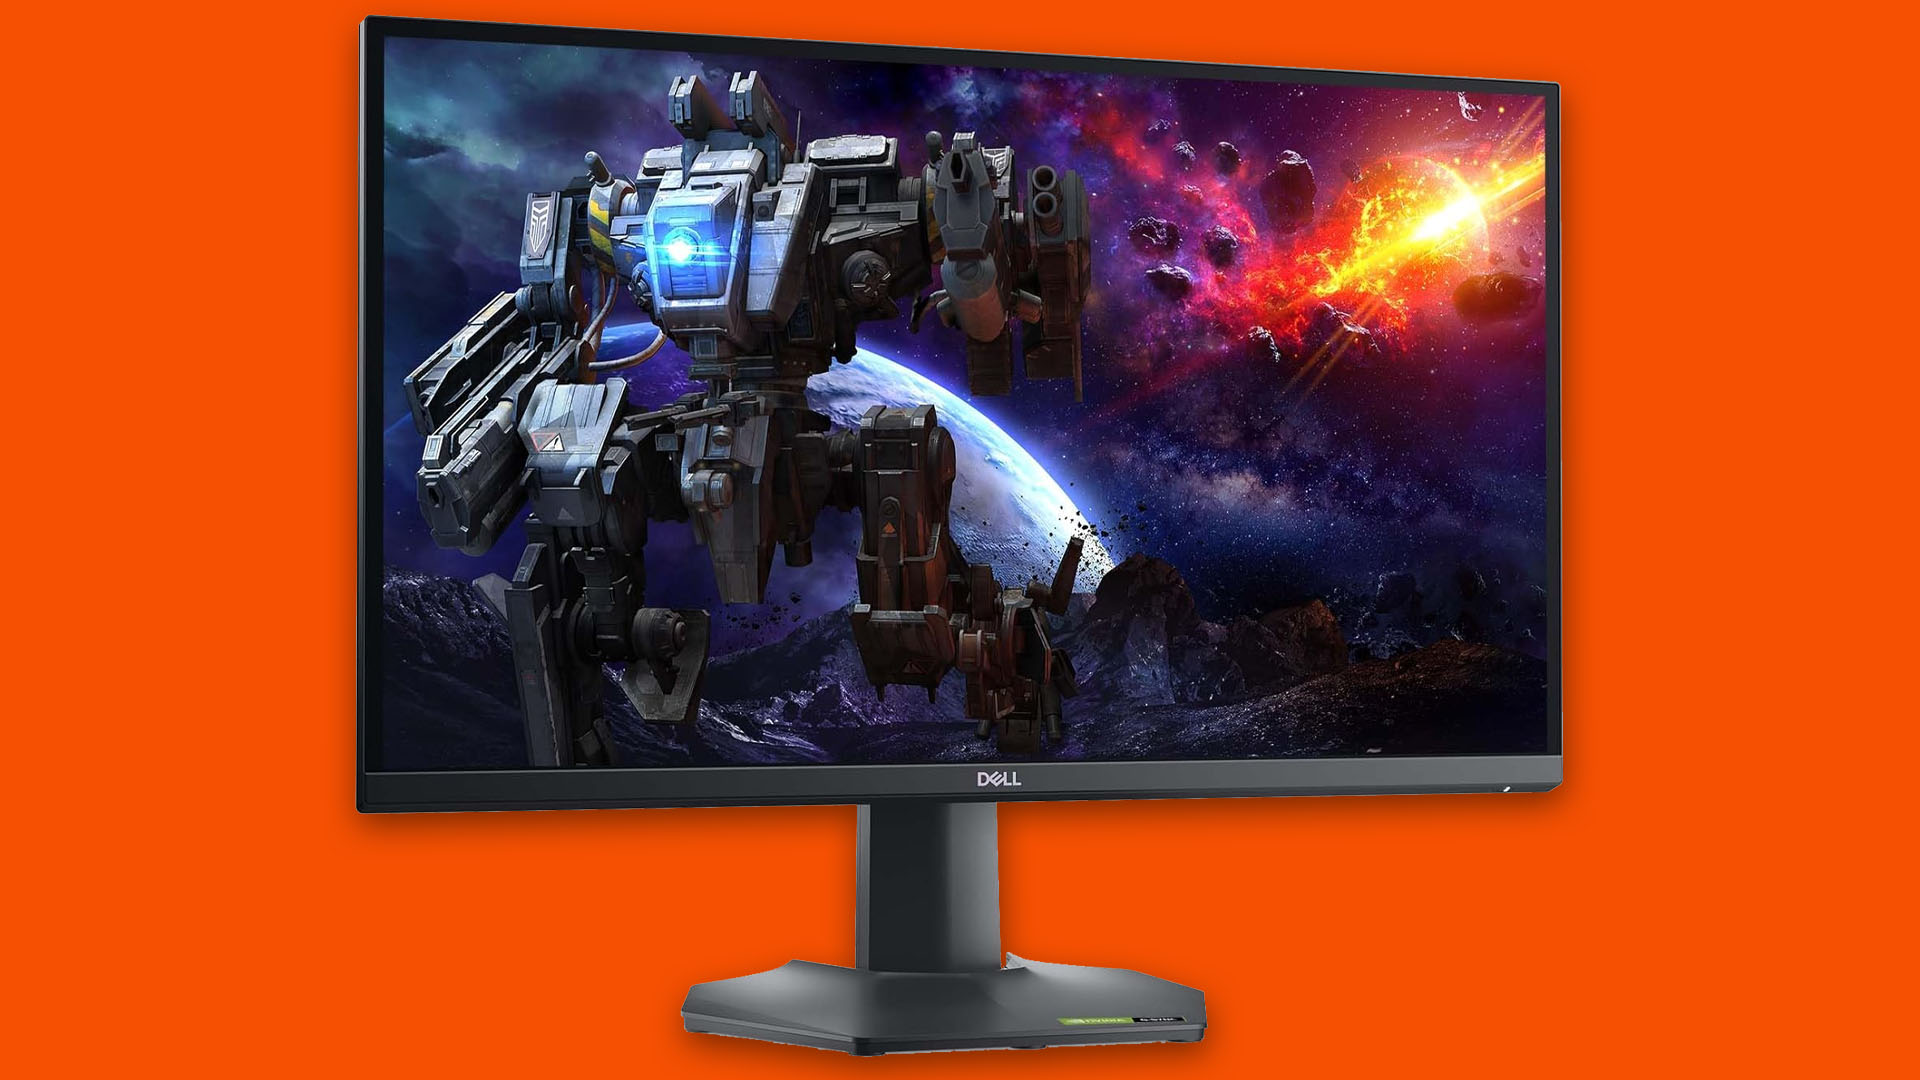 Save $100 on this 27-inch Dell gaming monitor if you act fast